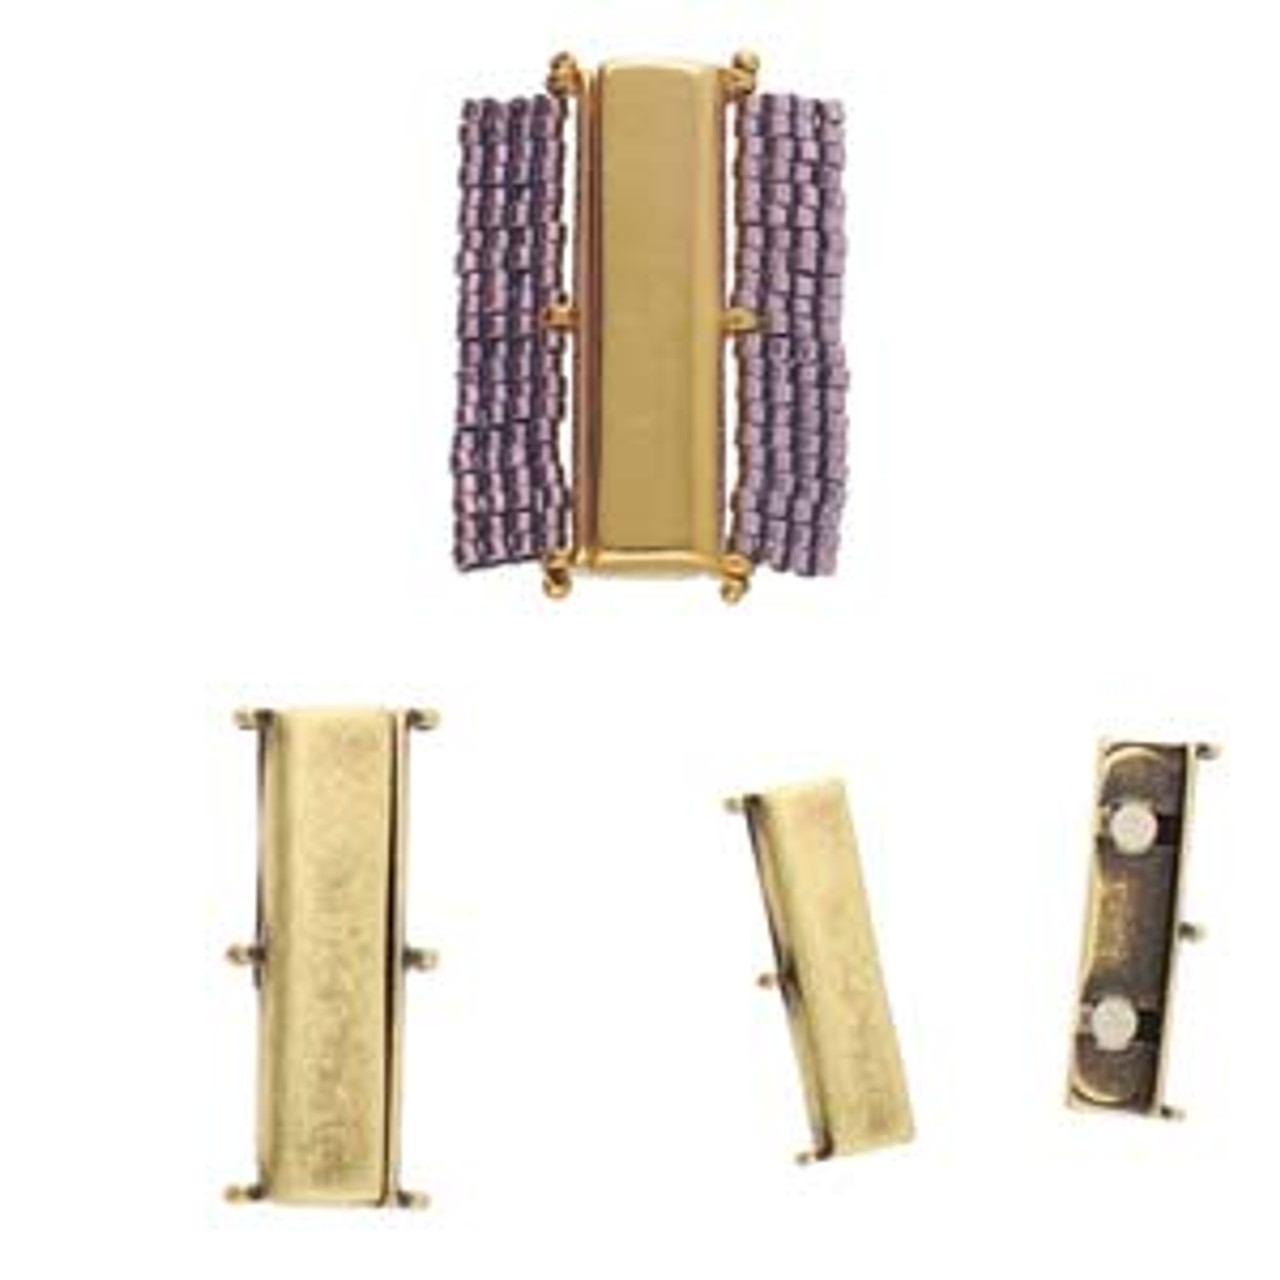 AXOS III DELICA MAG CLASP ANT. BRASS PLATE